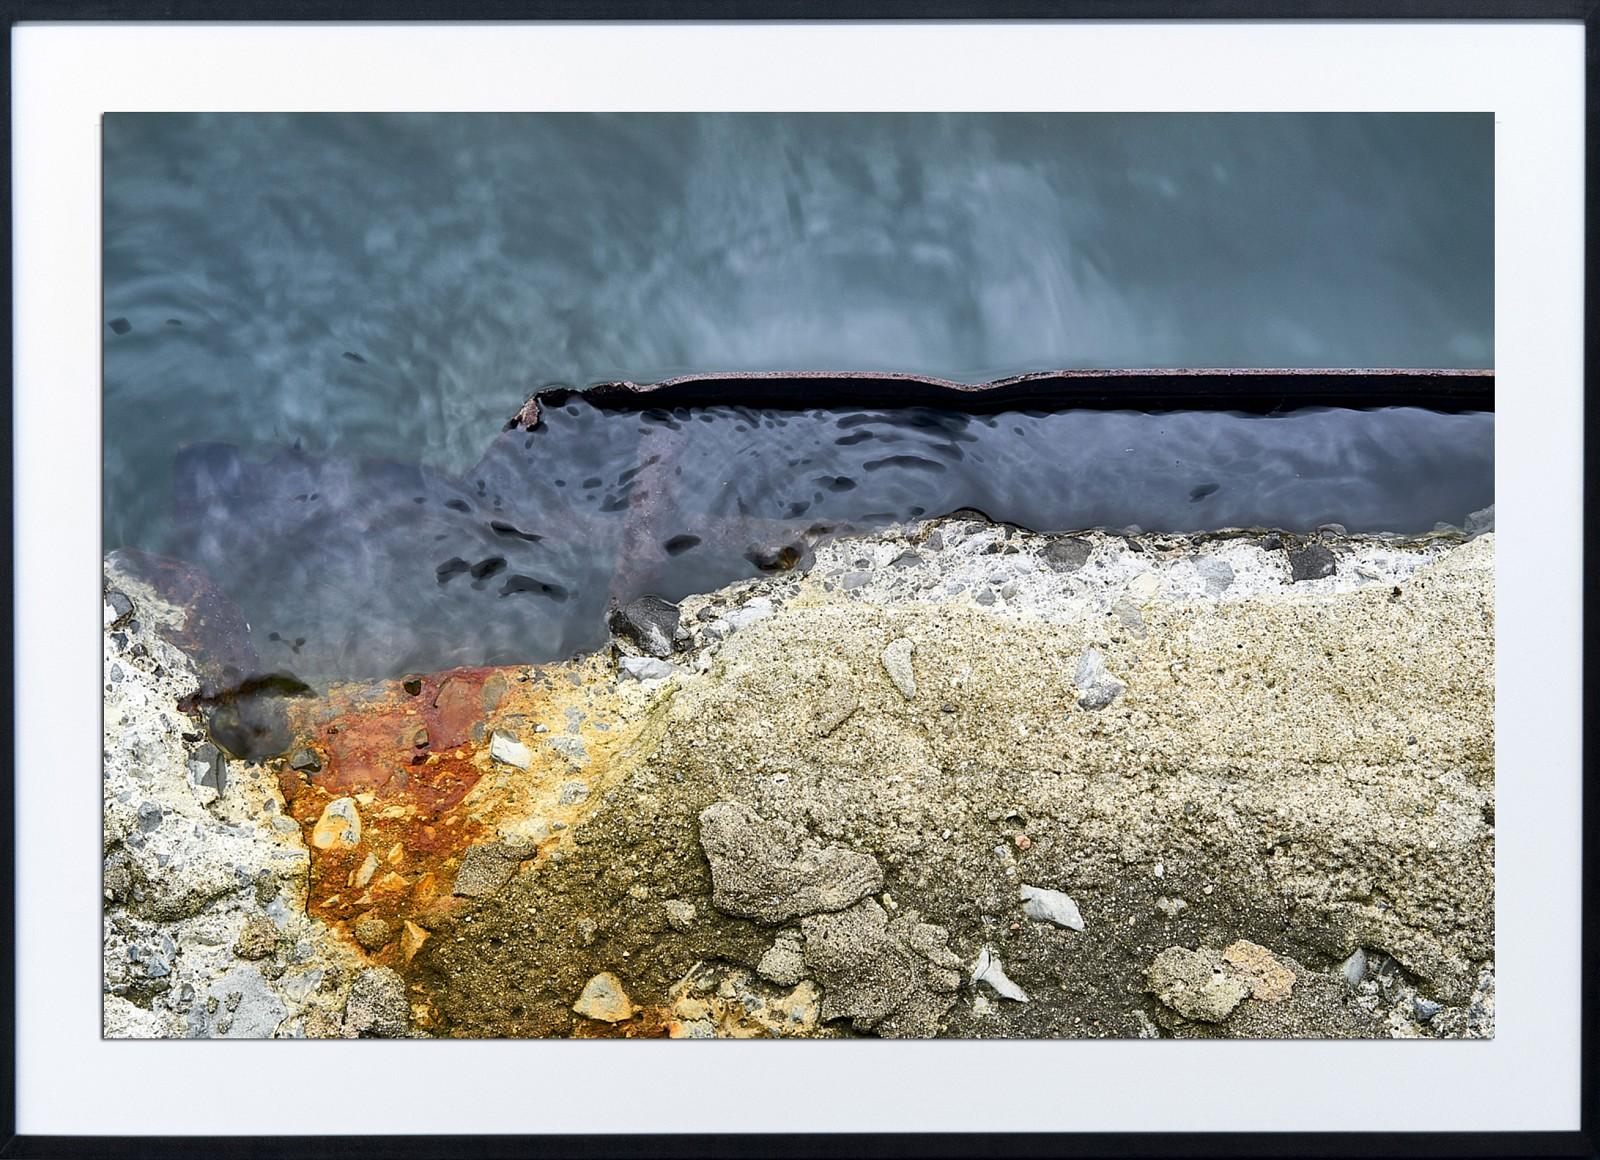 Kingston Floodwater 1/8 - abstracted landscape, color photography, giclée print - Photograph by Shani Mootoo